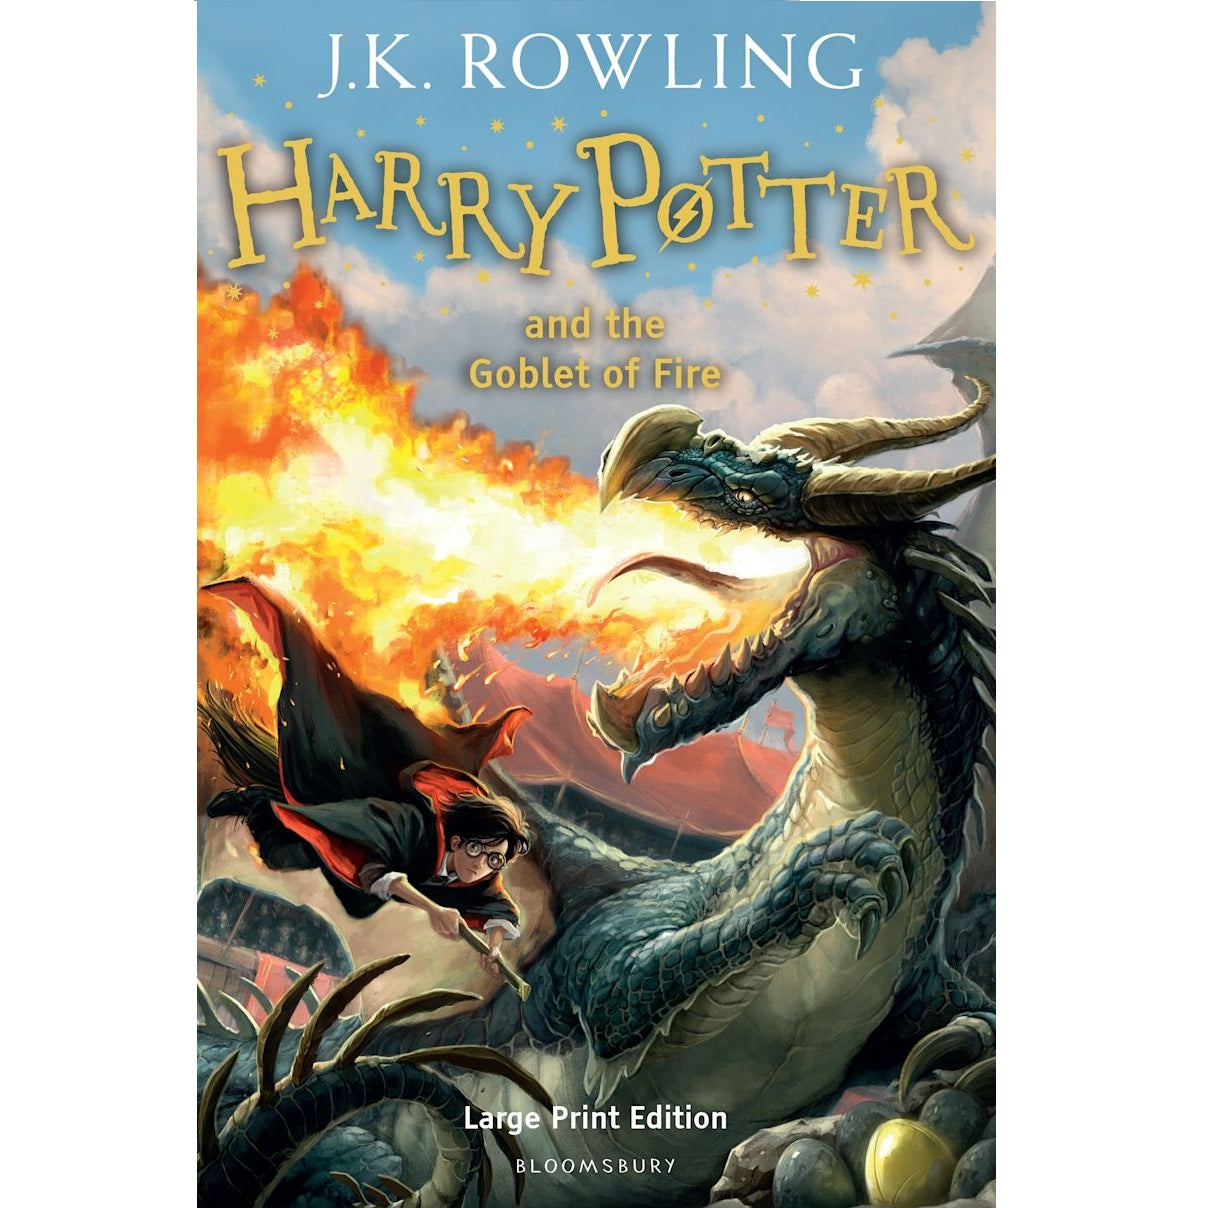 Harry Potter and The Goblet Of Fire #4 (by J.K. Rowling) J.K. Rowling